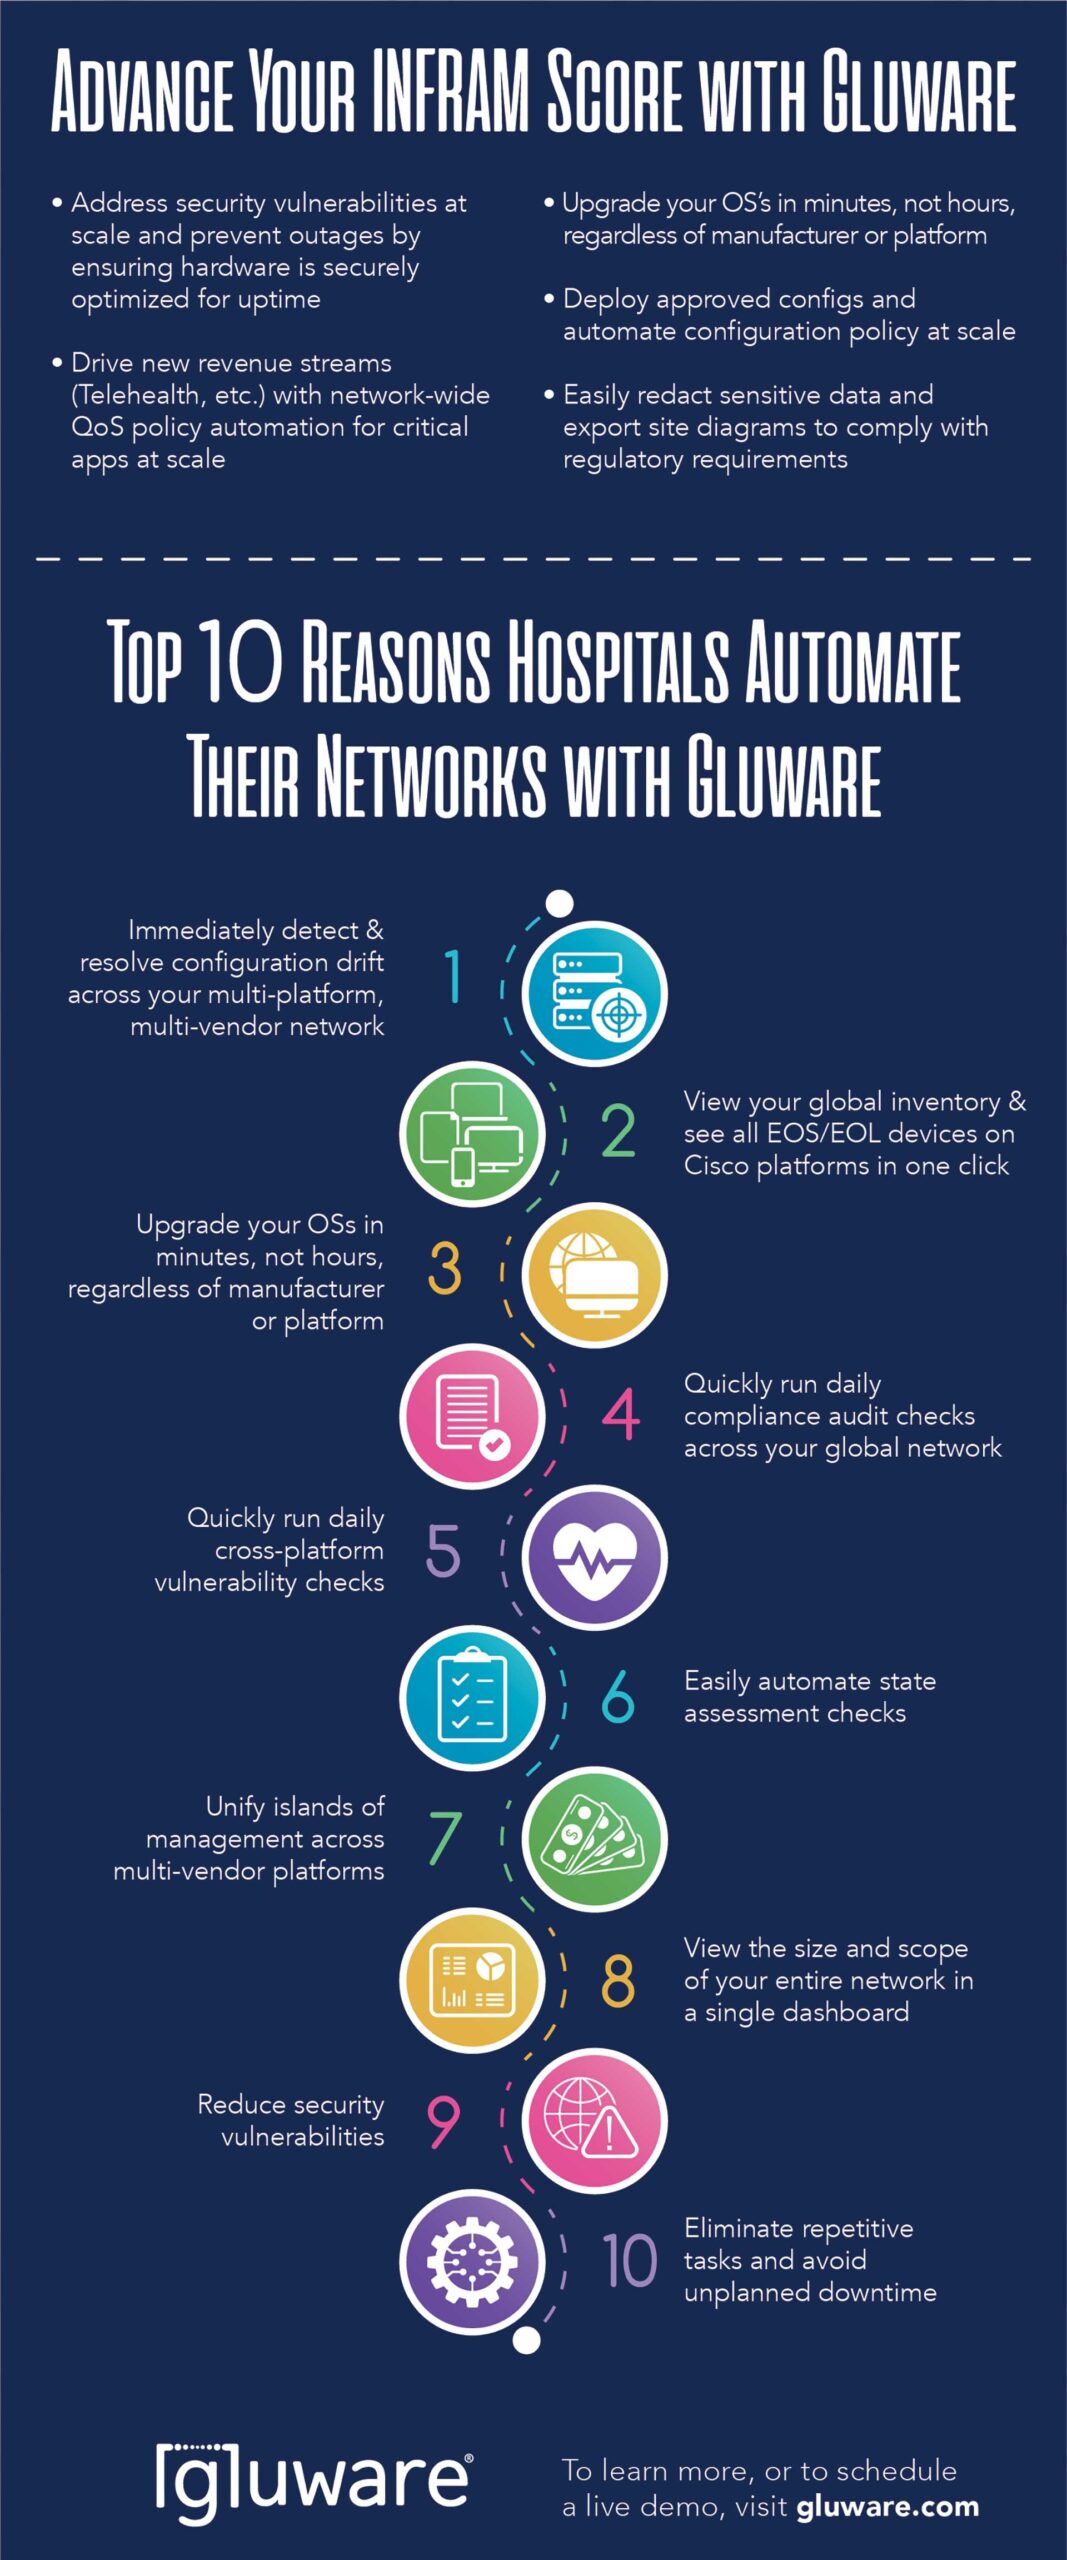 Top 10 Reasons Hospitals Automate Their Networks with Gluware